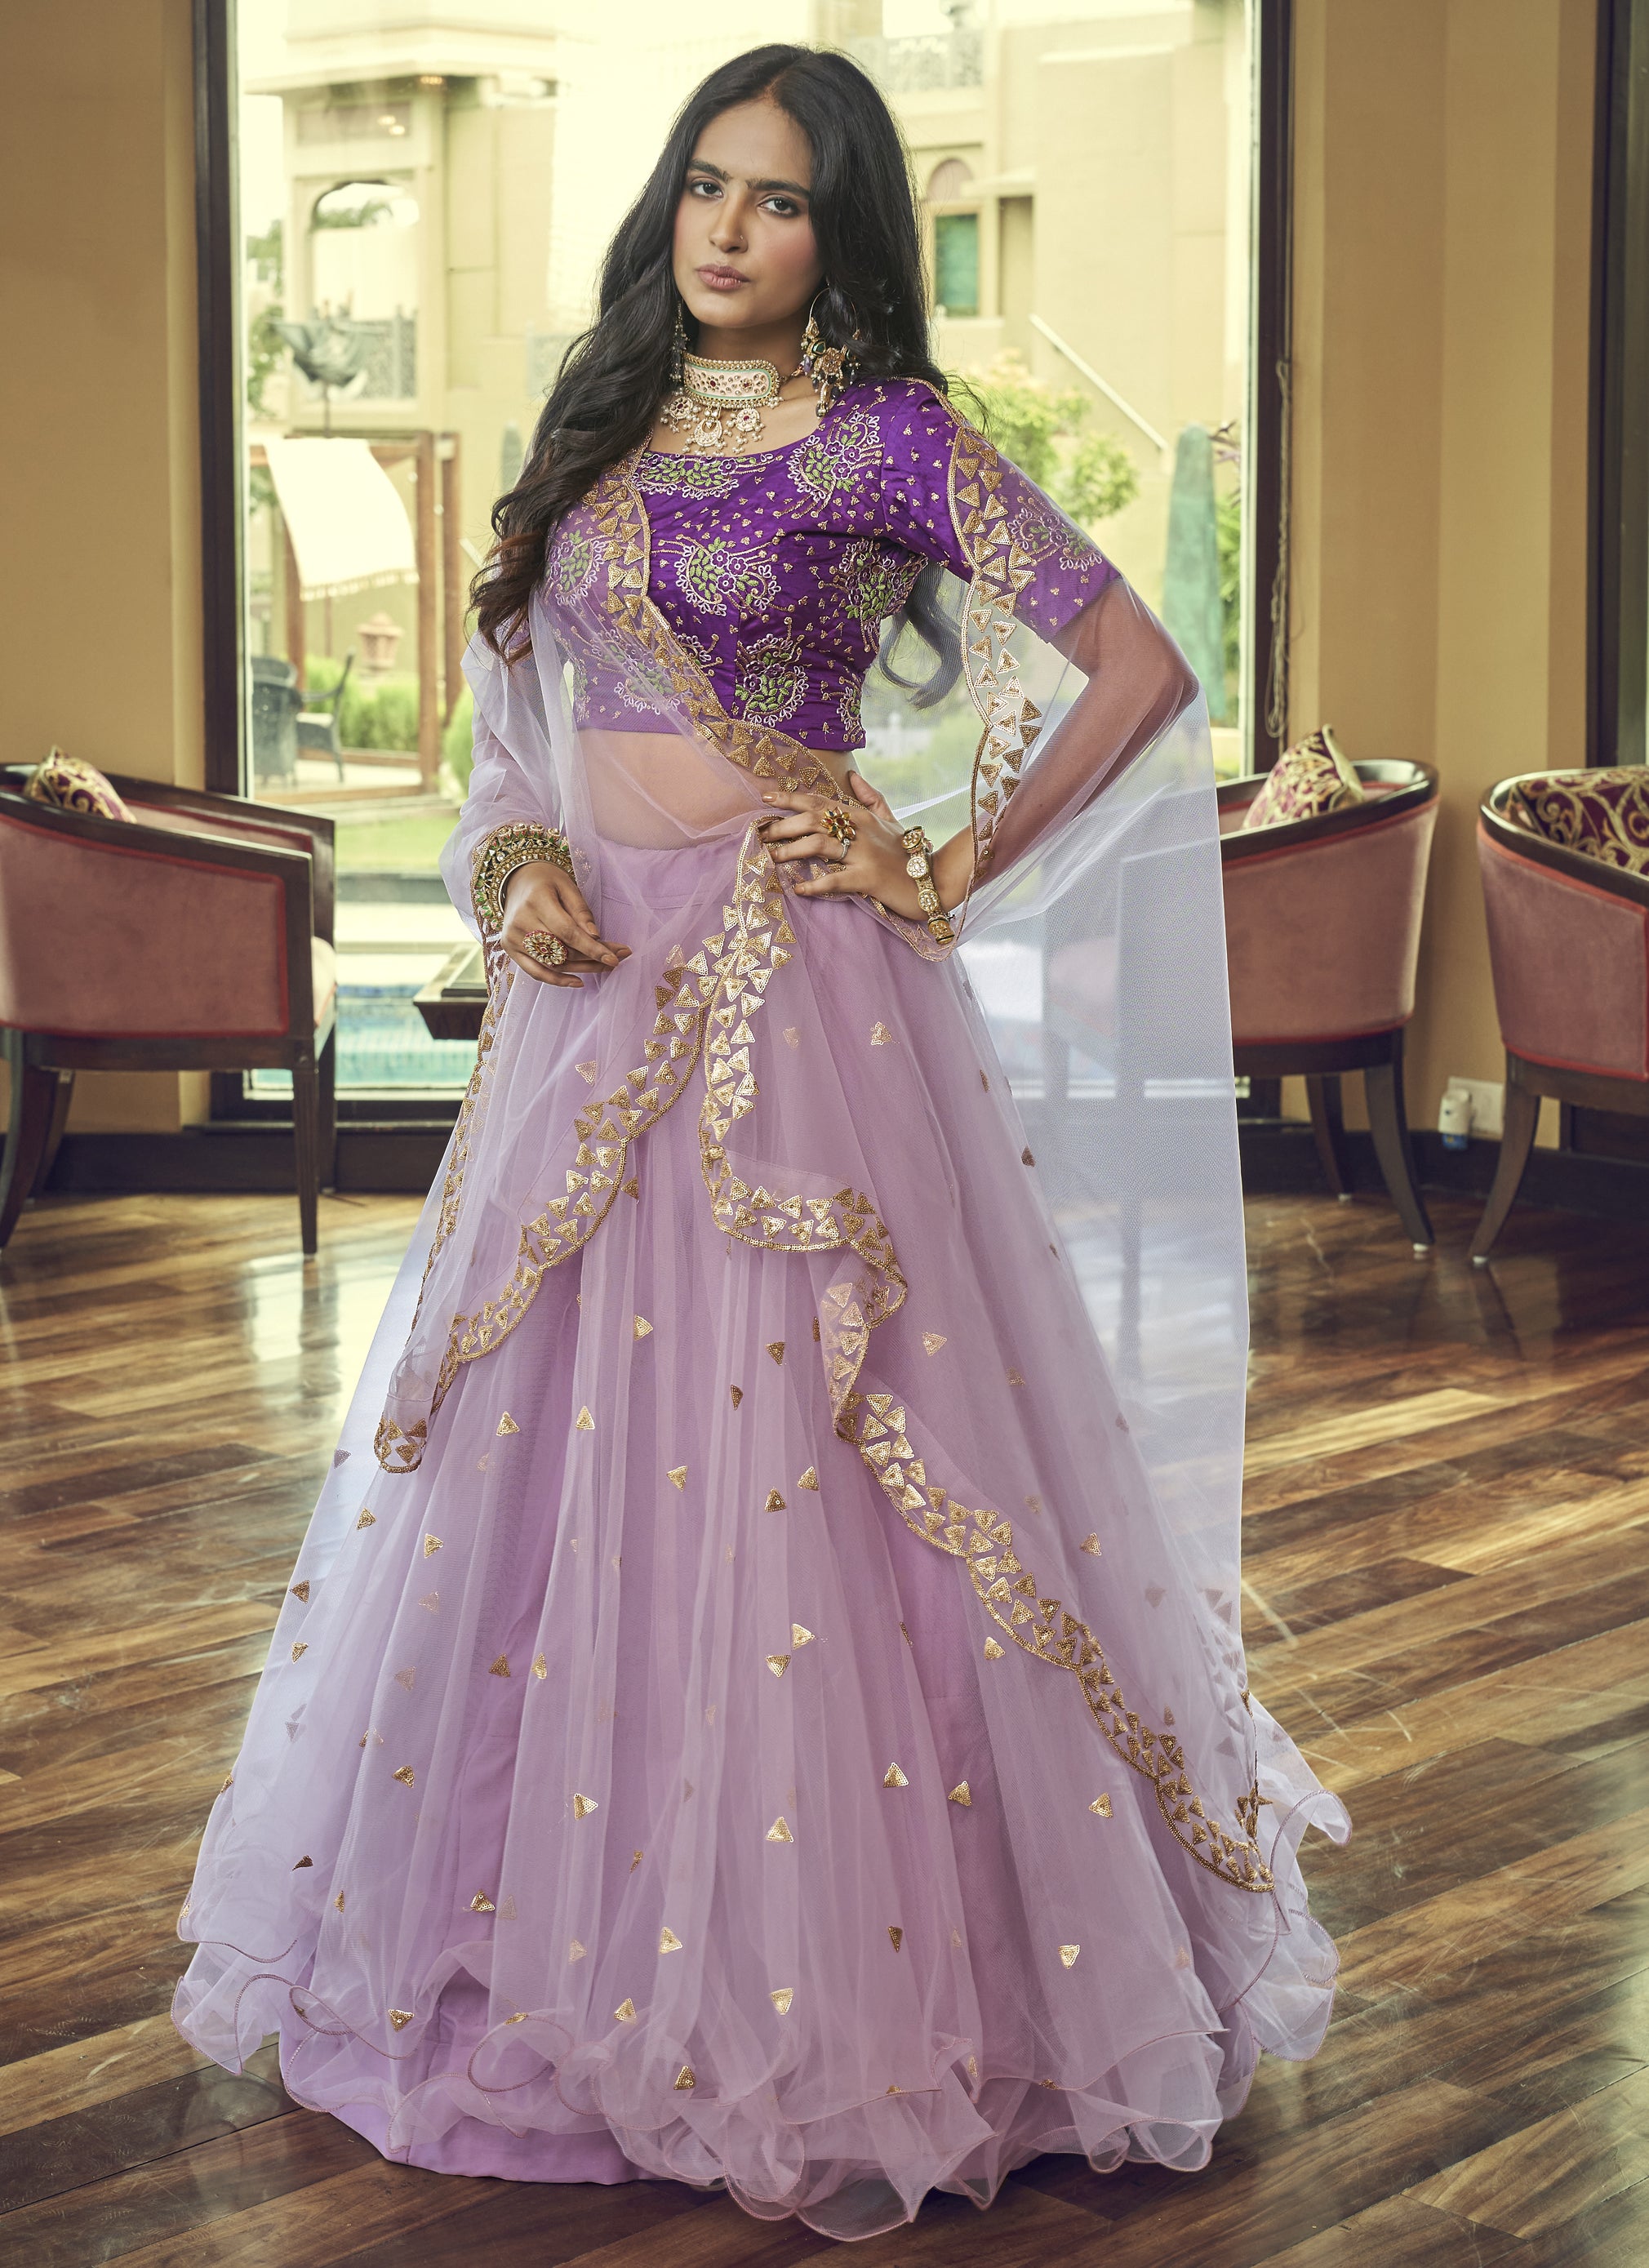 PANETAR Embroidered Stitched Lehenga Choli - Buy PANETAR Embroidered  Stitched Lehenga Choli Online at Best Prices in India | Flipkart.com